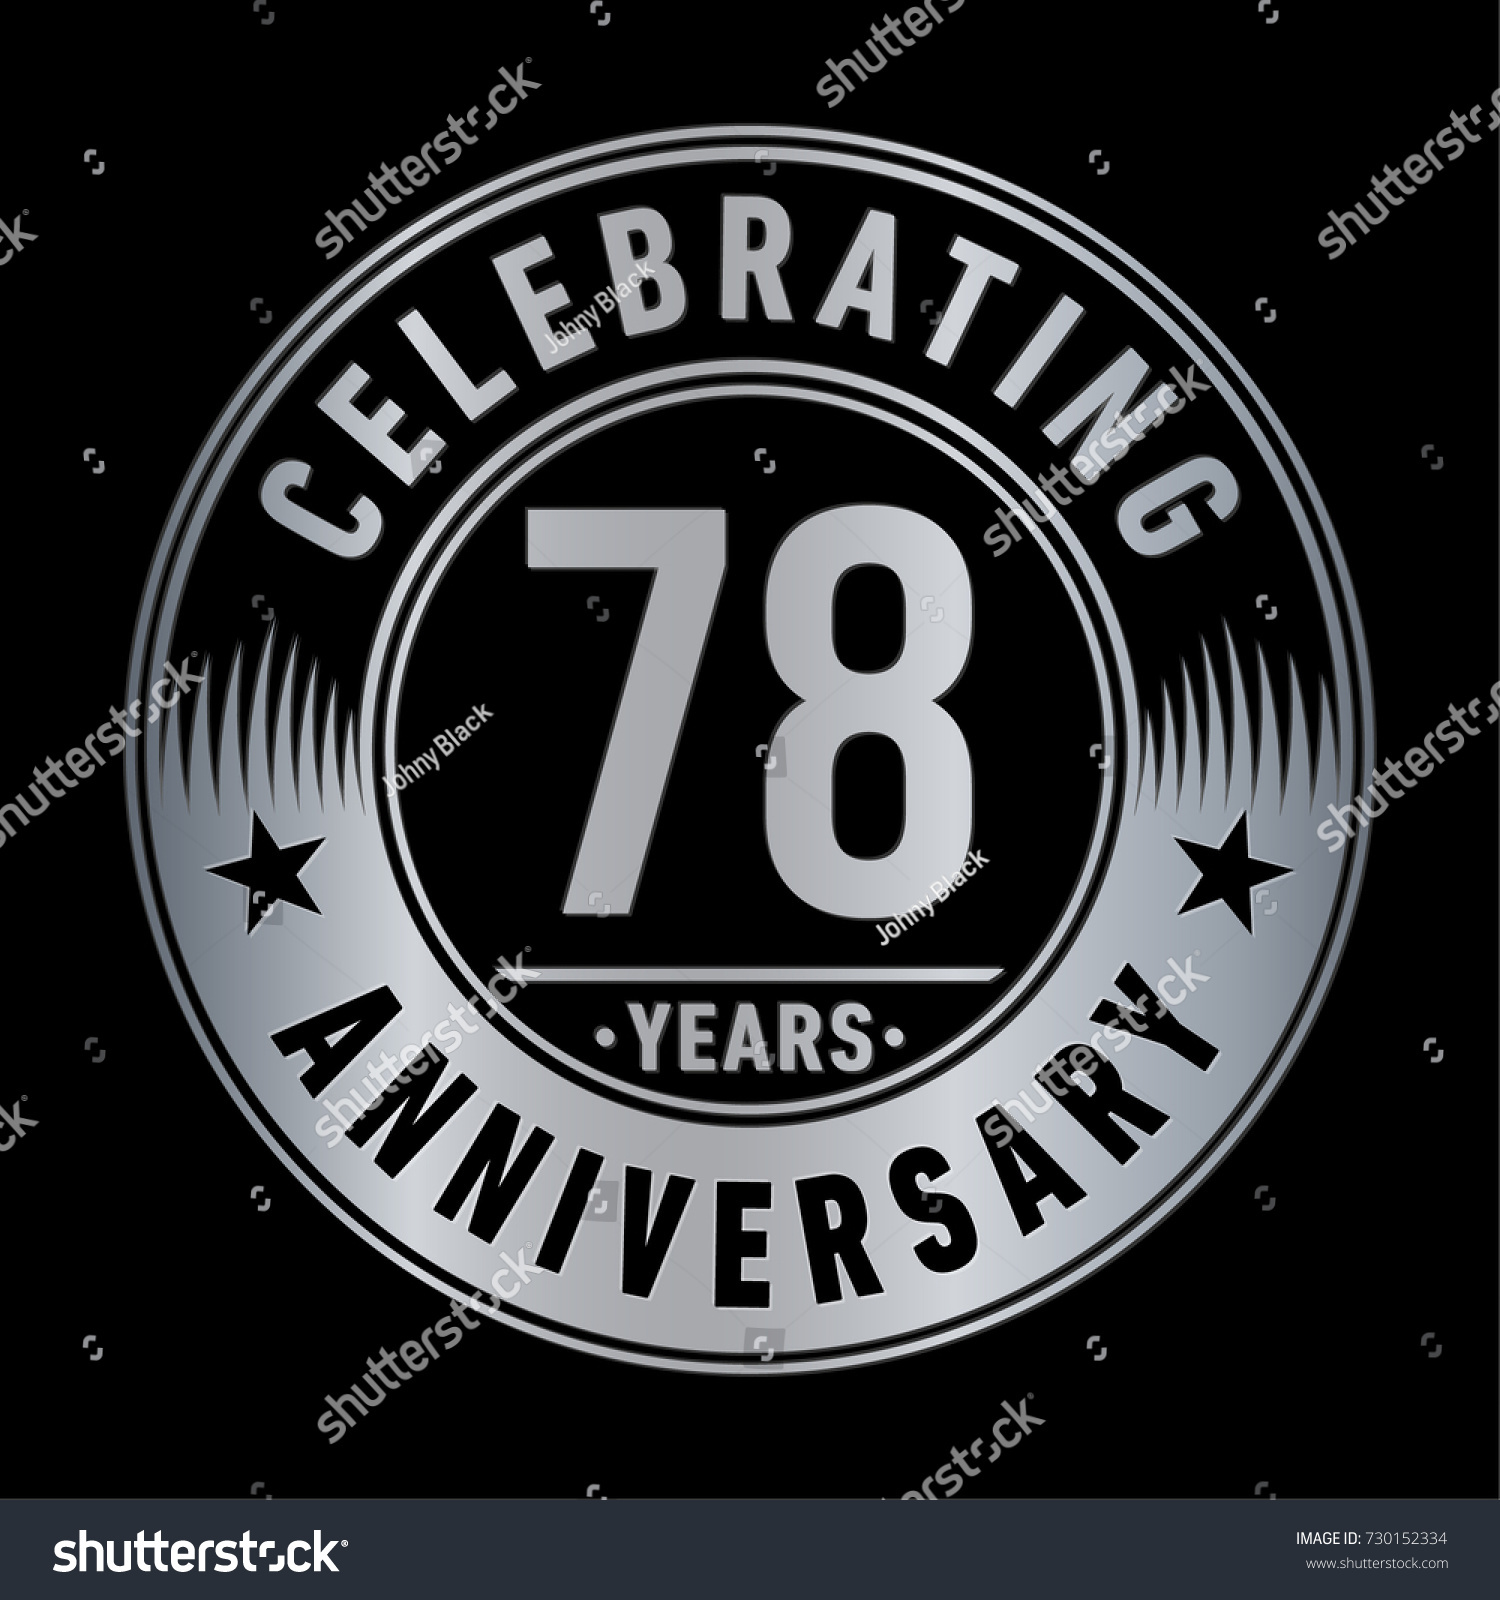 78 years anniversary logo template. Vector and - Royalty Free Stock ...